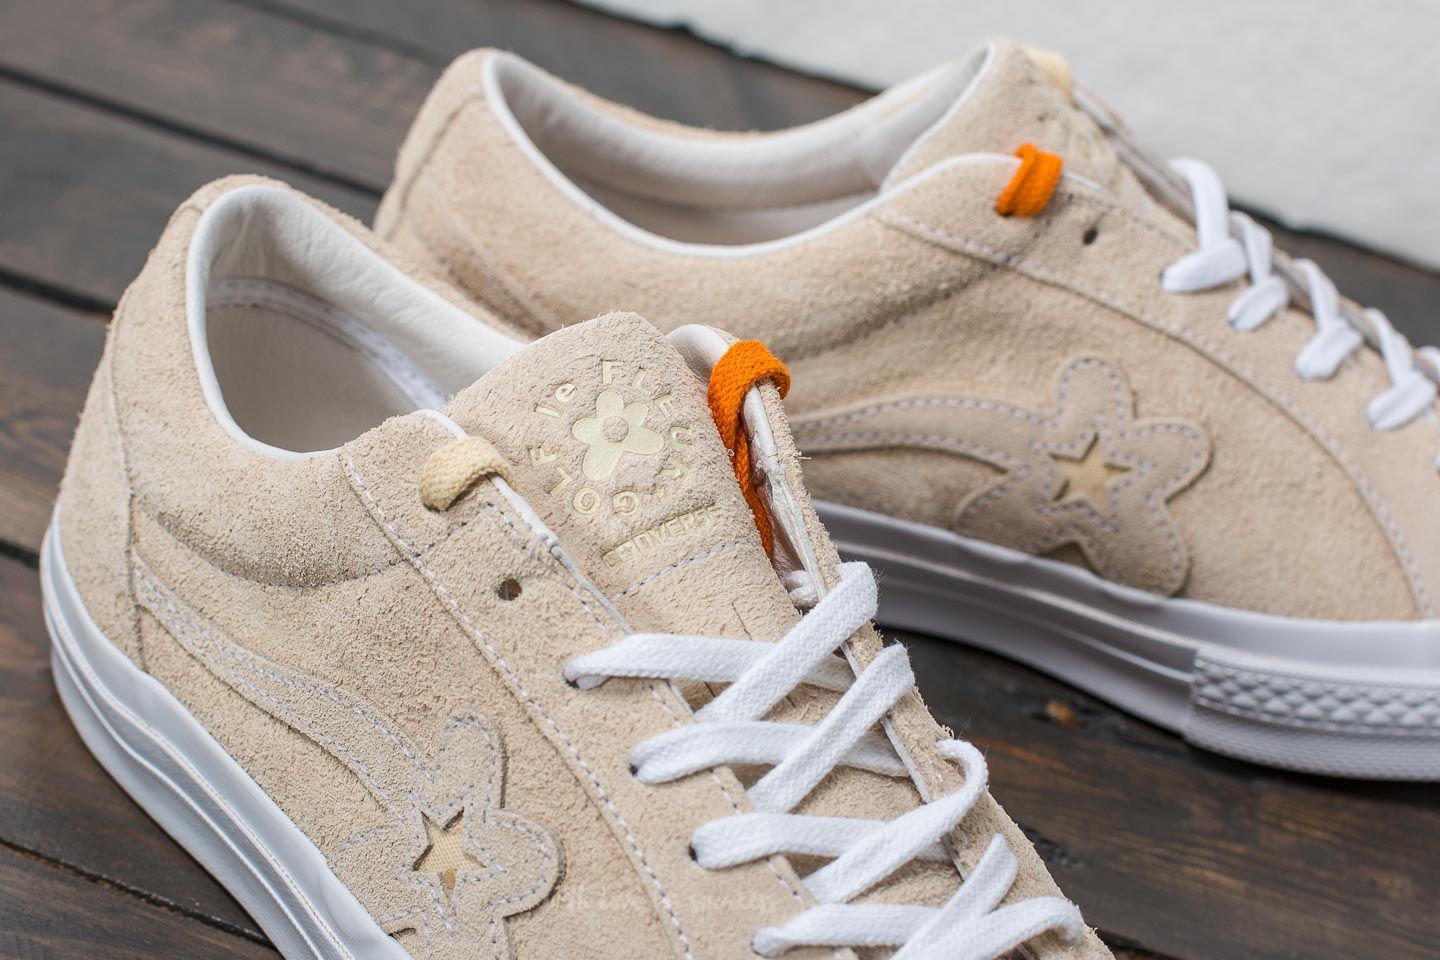 buy > tyler the creator x converse one star golf le fleur, Up to 68% OFF